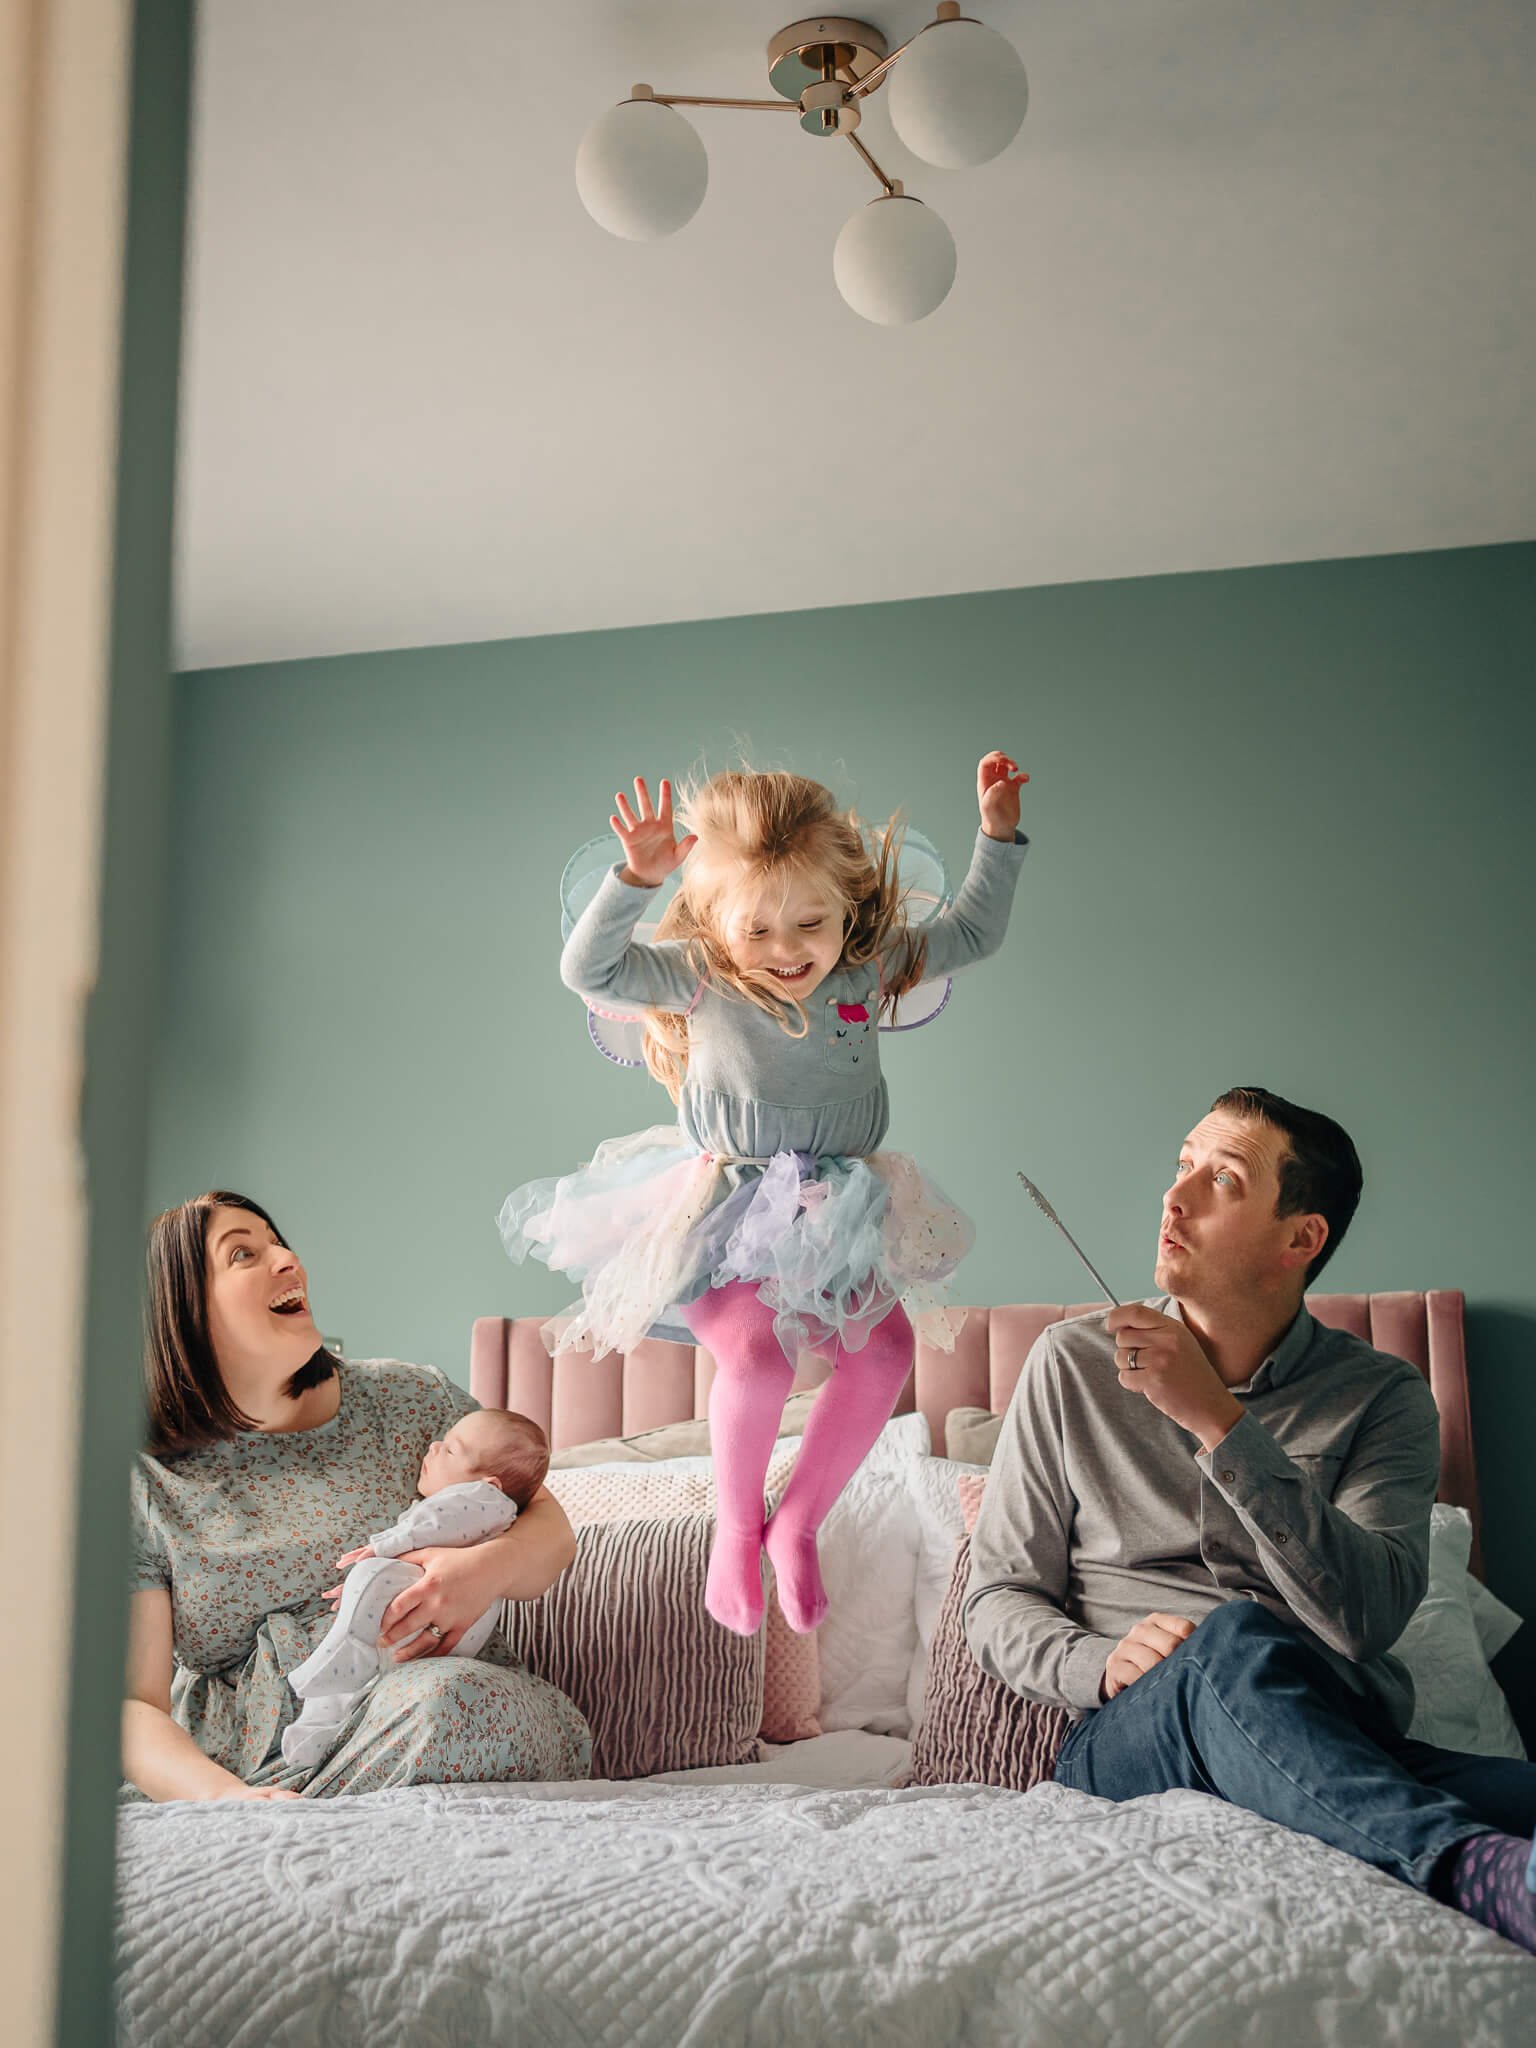 Little girl jumping on bed in tutu